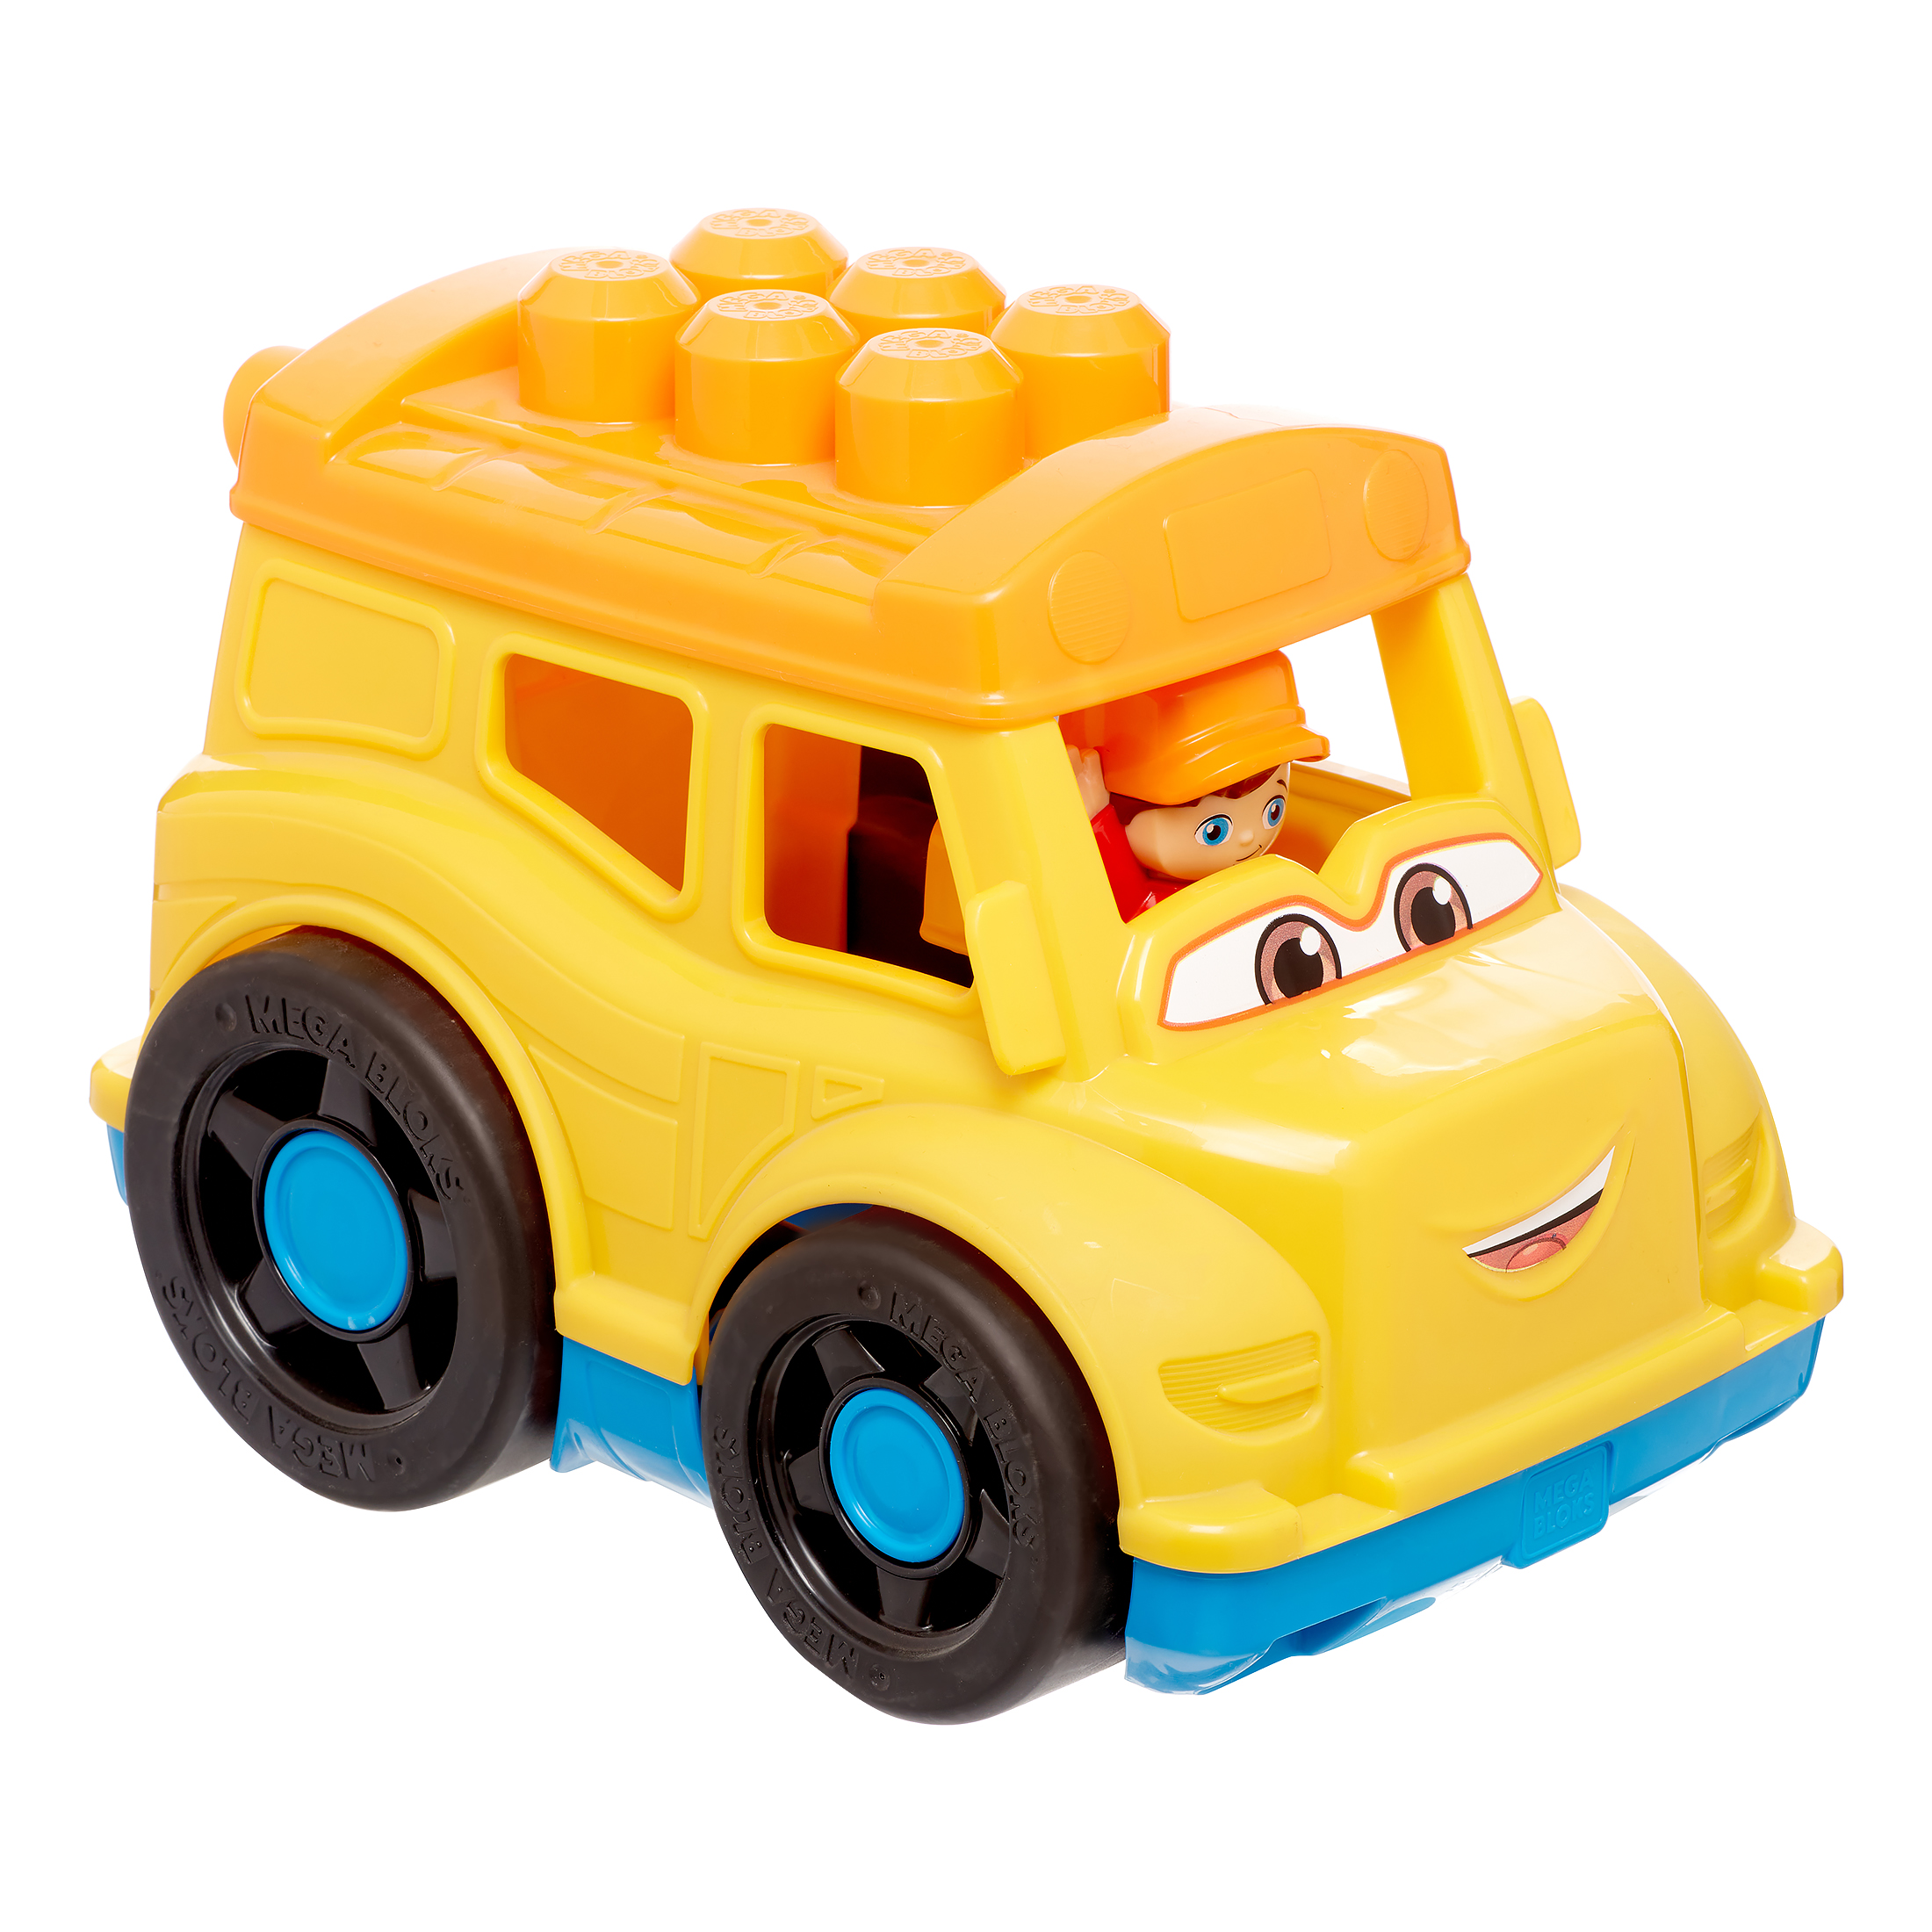 Mega Bloks First Builders Sonny School Bus with Big Building Blocks, Building Toys for Toddlers (6 Pieces) - image 4 of 8